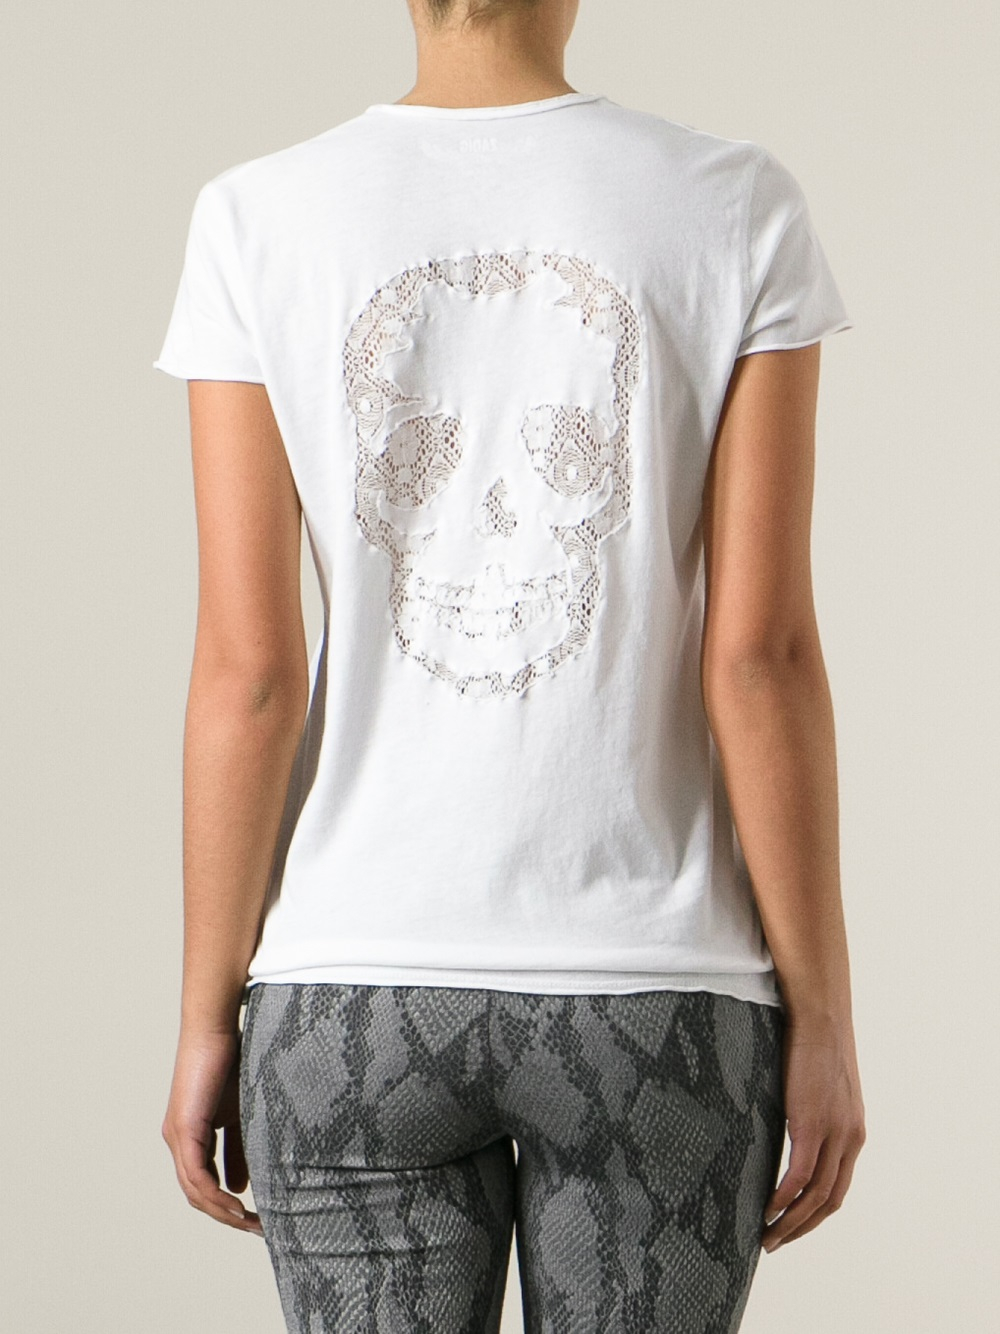 Lyst - Zadig & Voltaire Story Tshirt in White